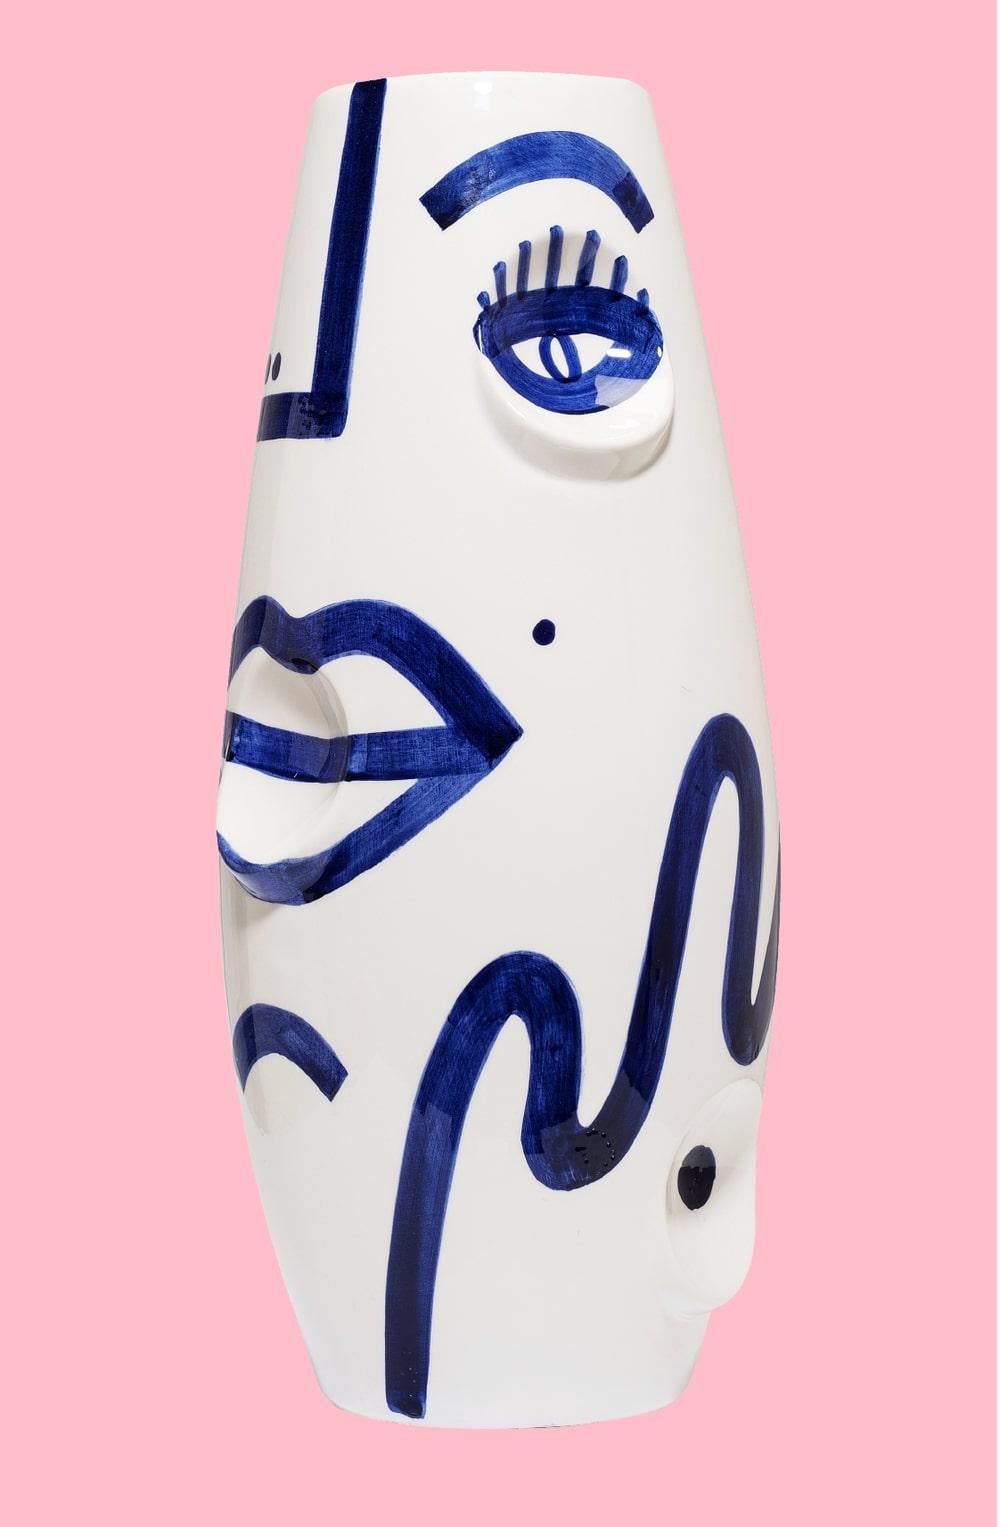 OKO face ceramic vase by Malwina Konopacka
Materials: Ceramic
Dimensions: ø 19 x 42 cm

It was first presented in 2014 as part of Tokyo Designers Week and has since had numerous re-editions and collection launches, all decorated and hand-painted